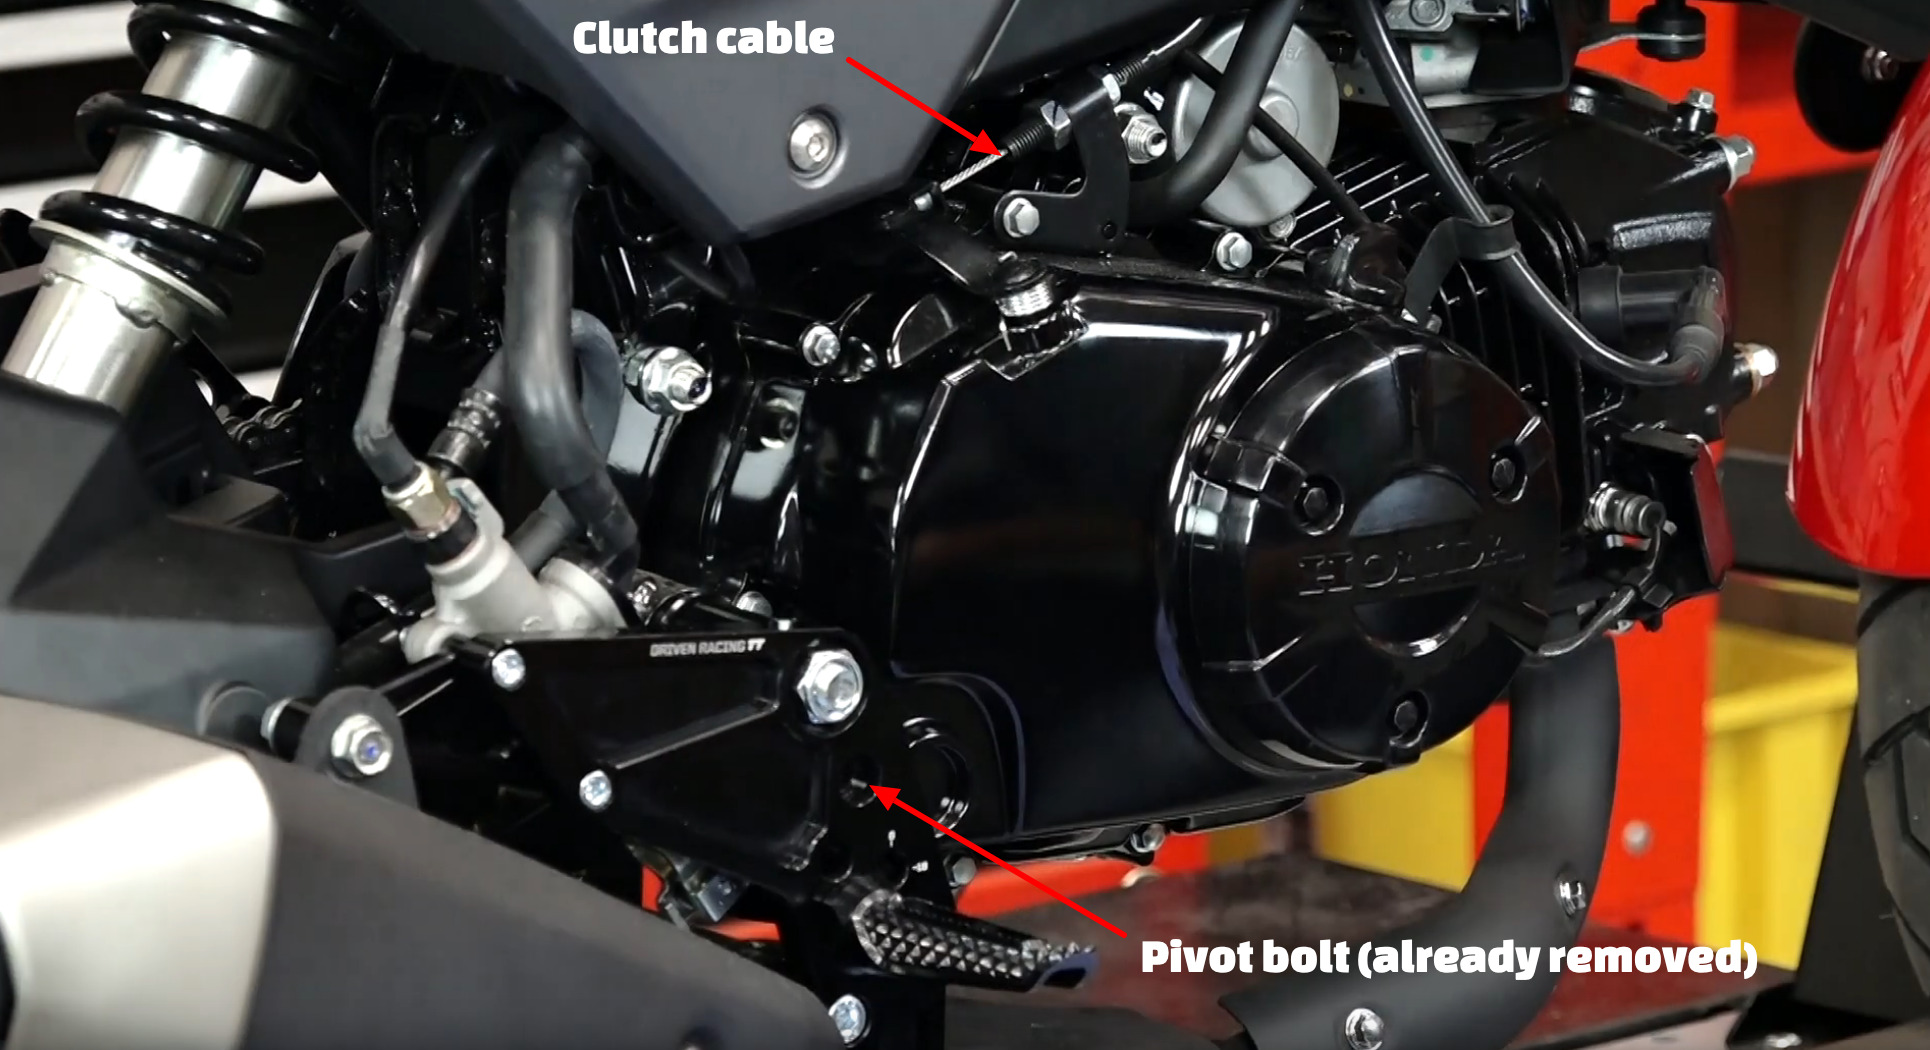 Honda Grom clutch cable